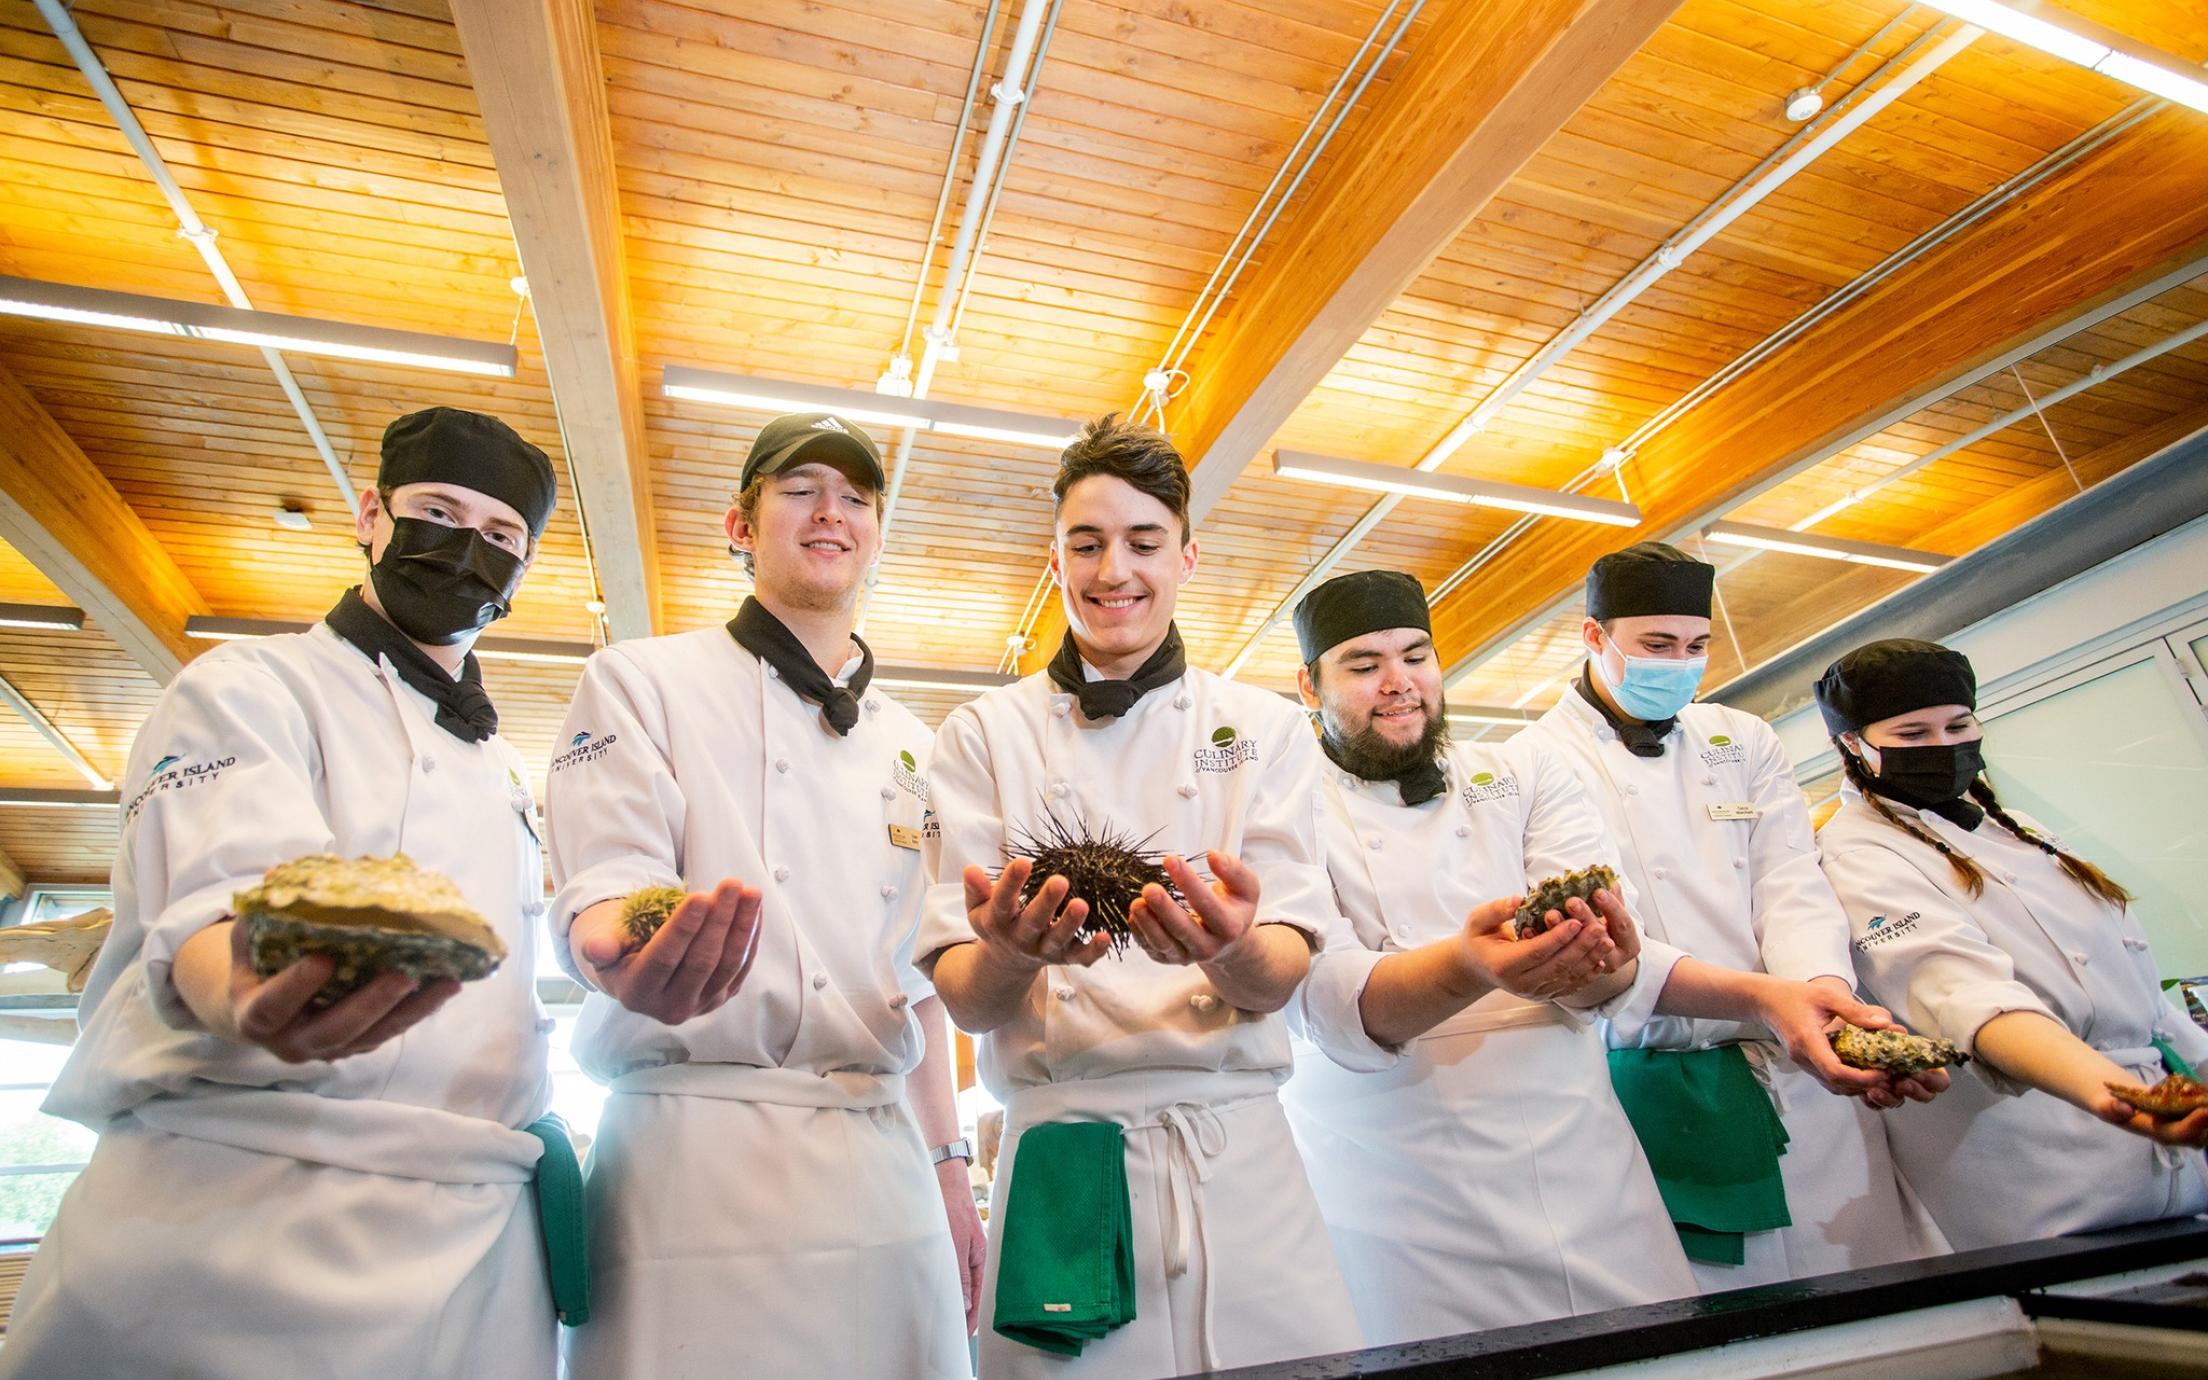 Culinary arts students hold different seafood items